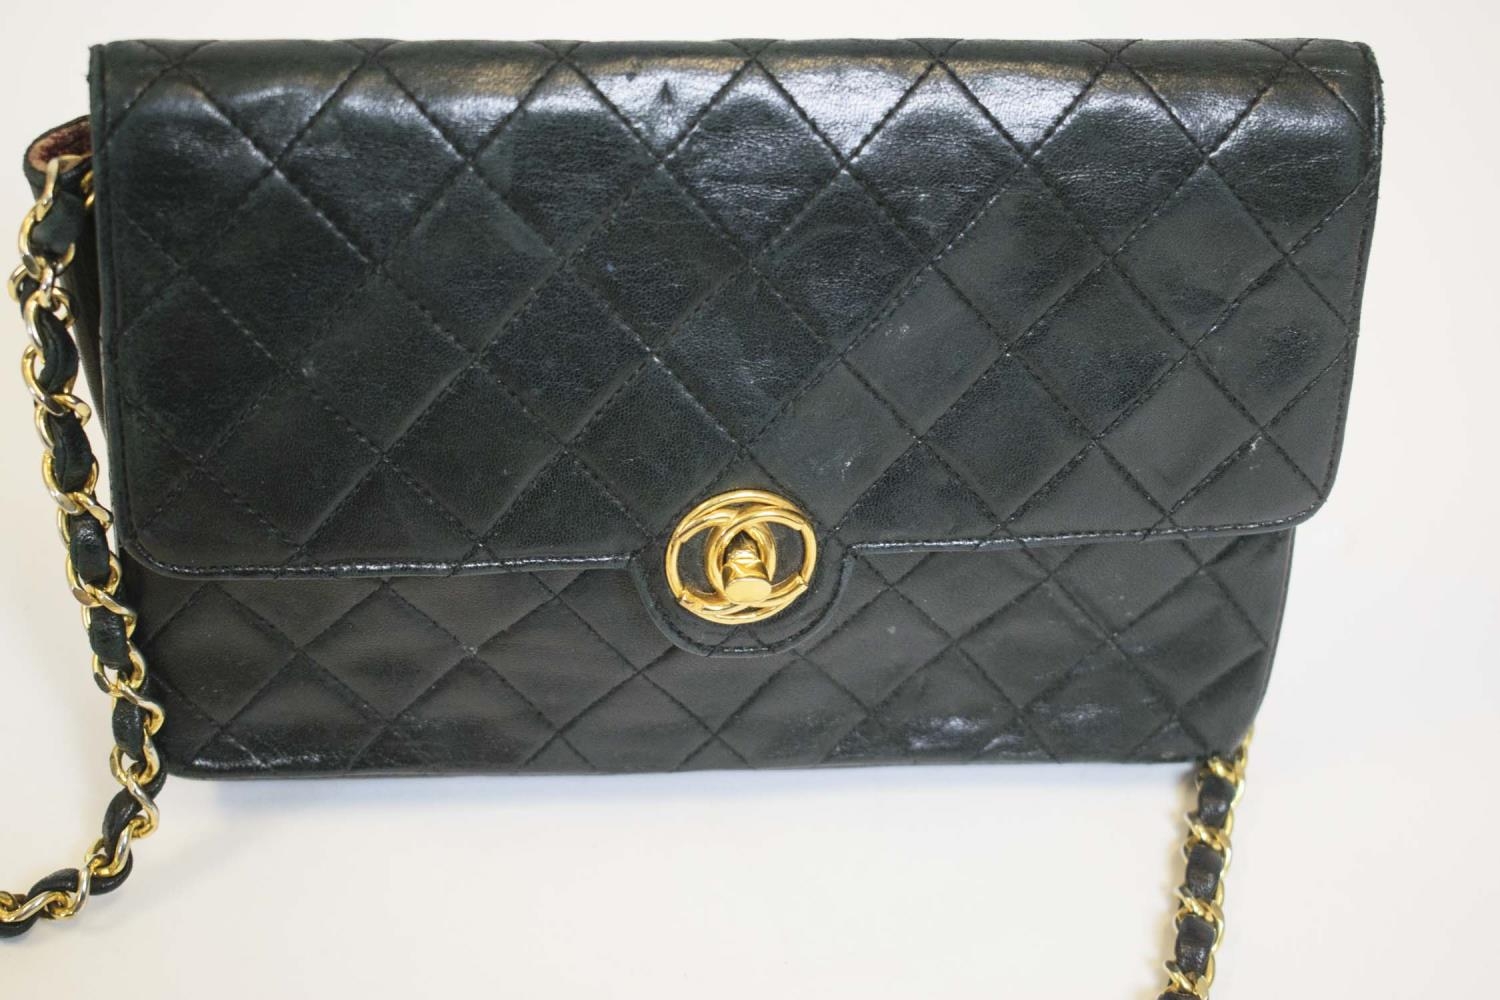 VINTAGE CHANEL FLAP BAG, round turn-lock, iconic burgundy leather lining, quilted front and back - Image 6 of 13